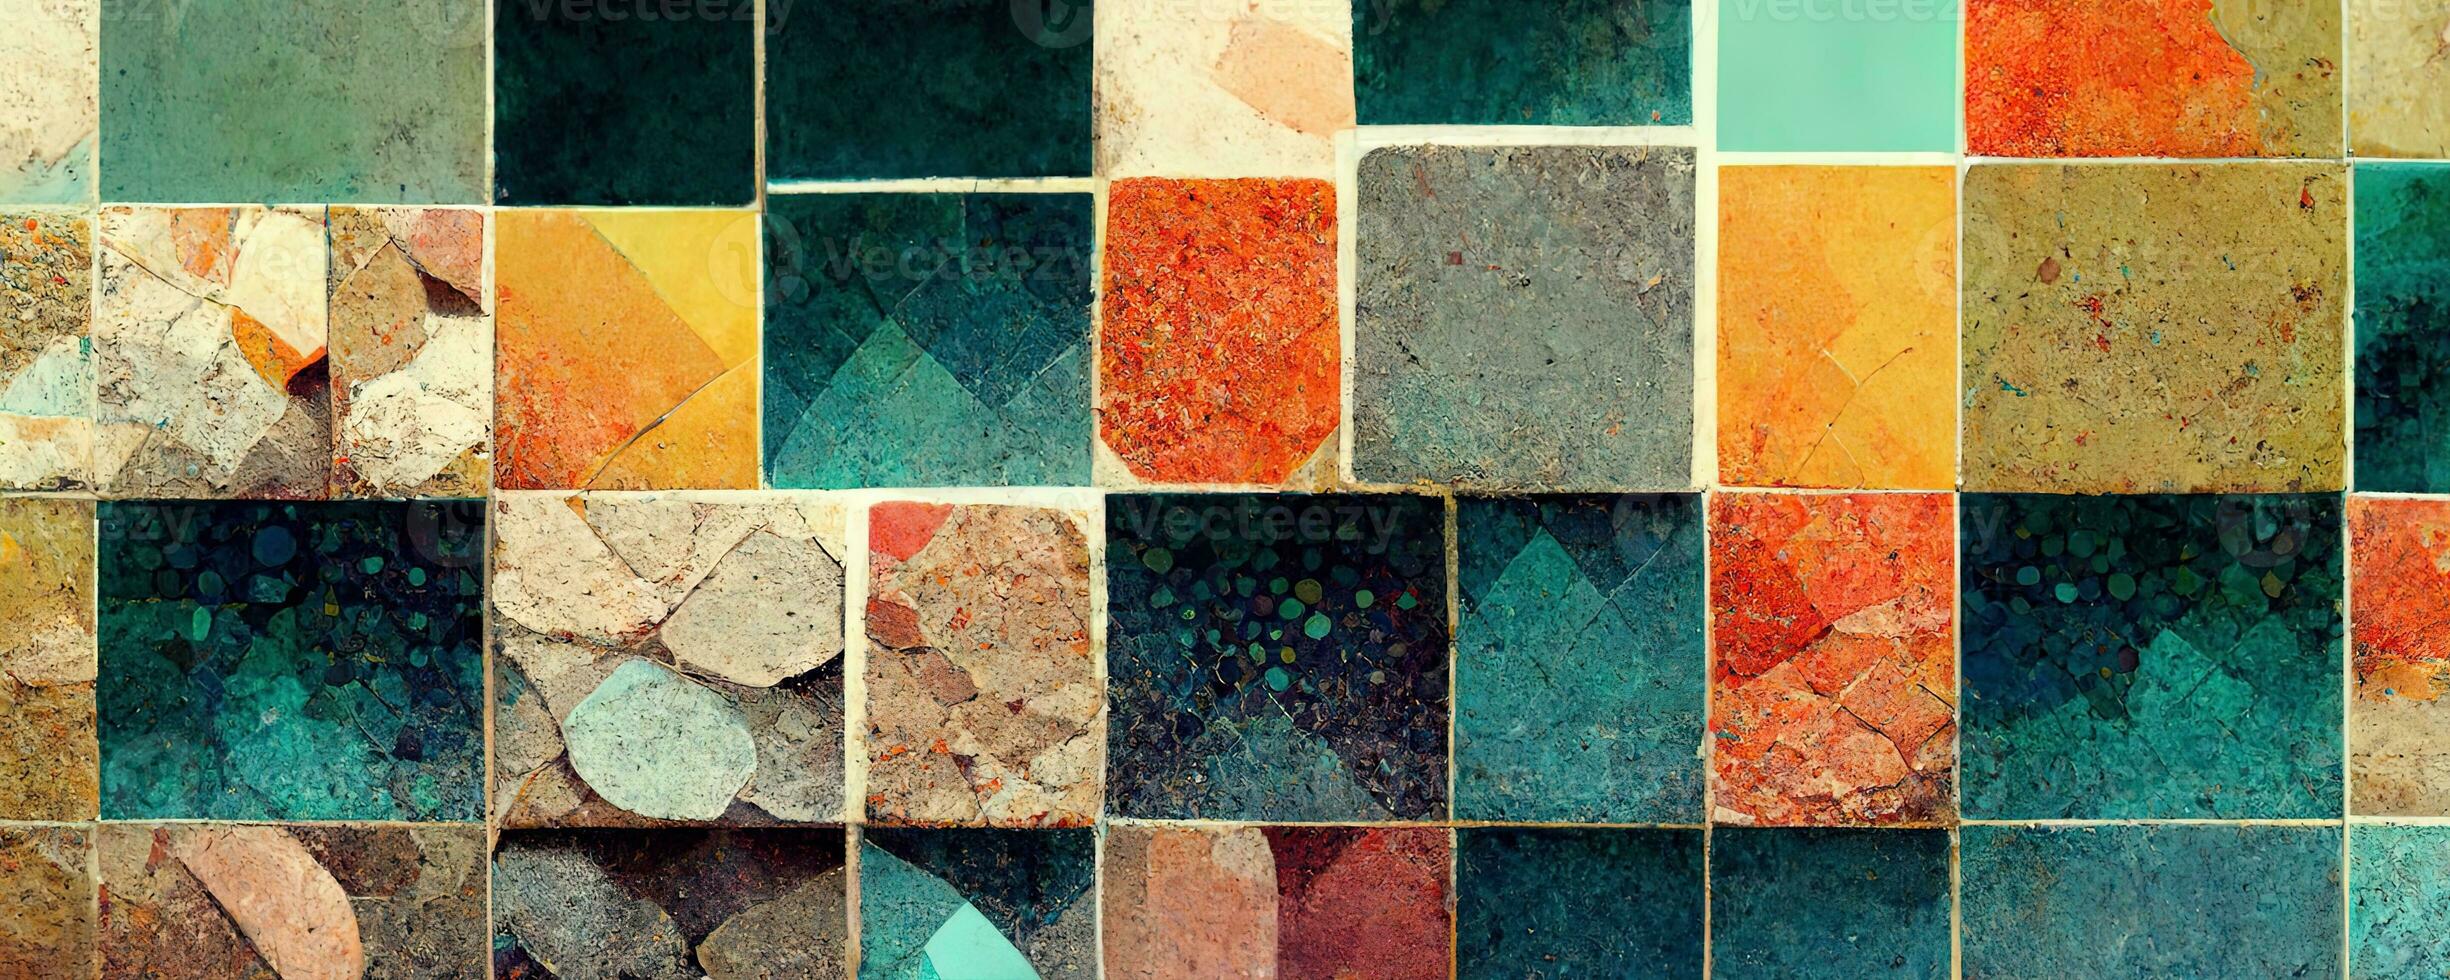 Artistic colorful mosaic pattern. Collage contemporary print with trendy decorative mosaic pattern with different colors, modern art. Banner concept photo